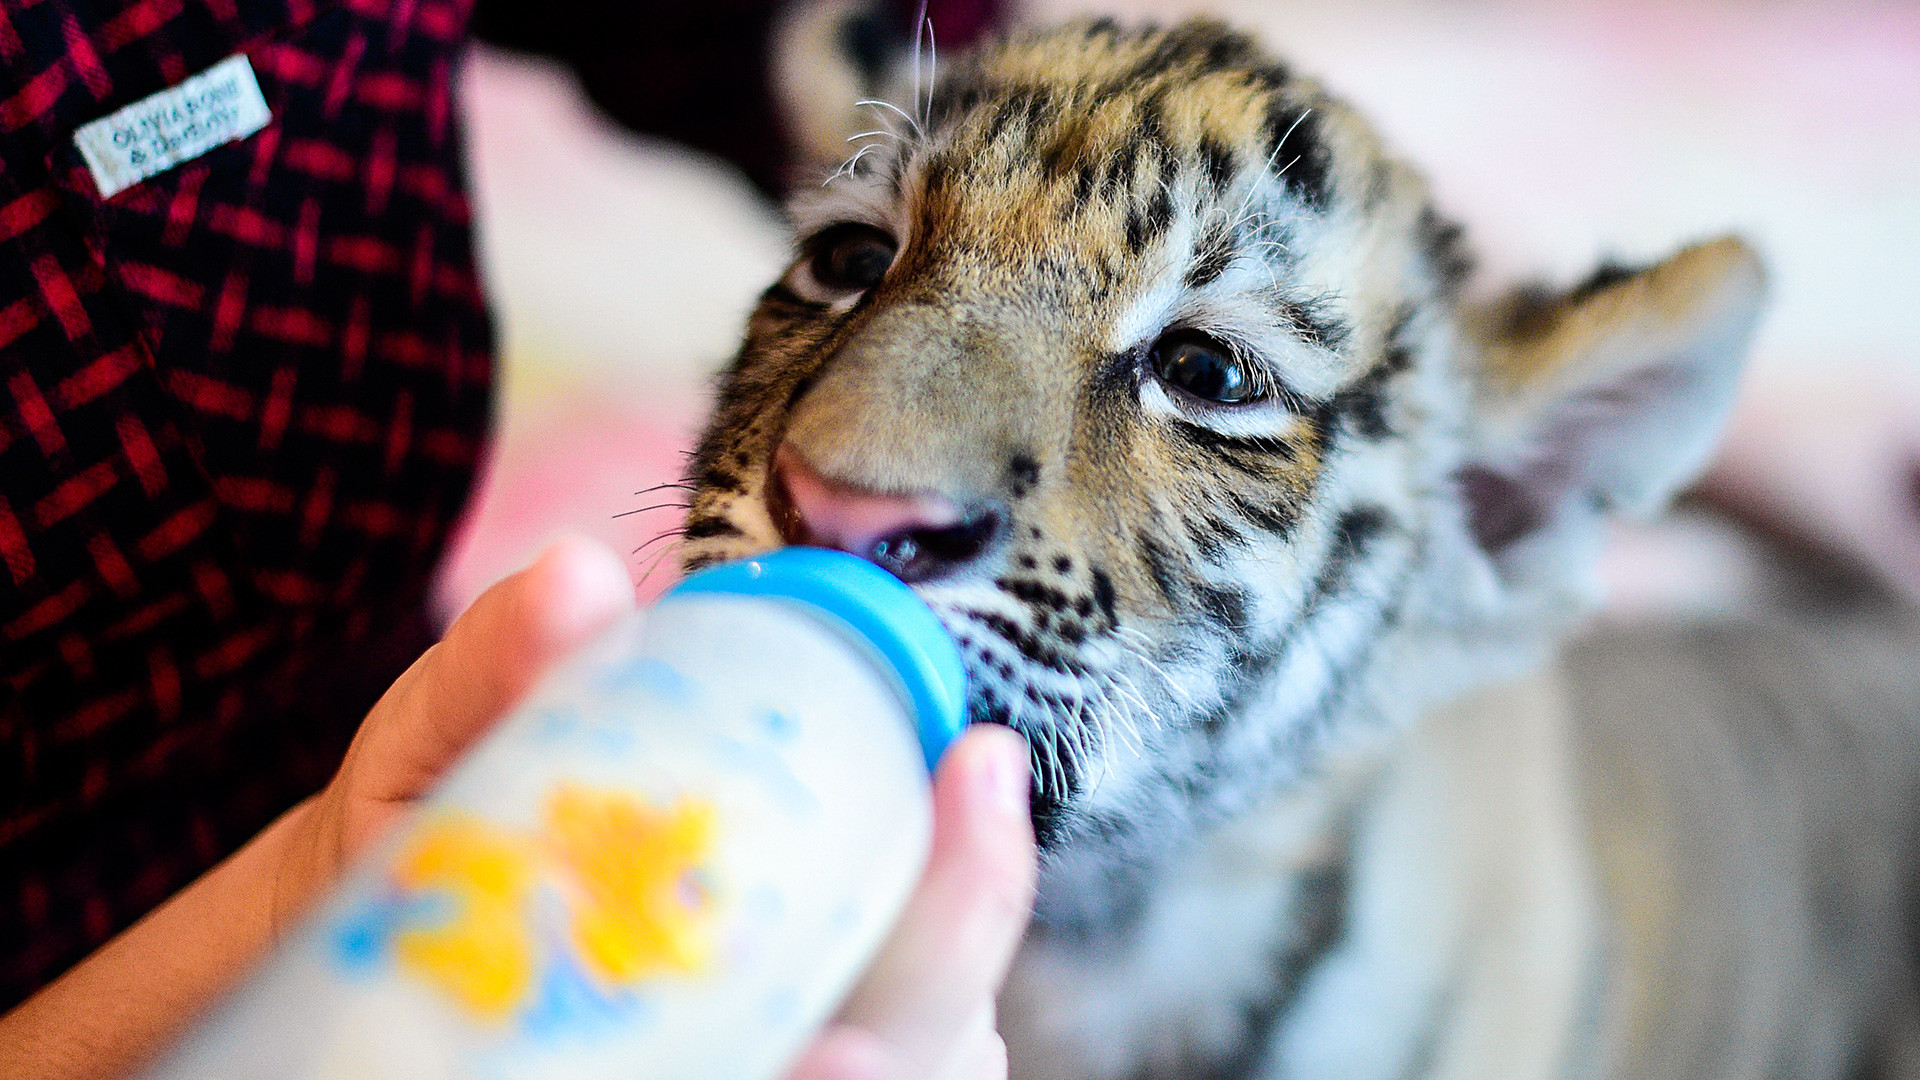 Vet Vasilina Tataurova feeding a two-month old Siberian tiger cub, Sherkhan, in her house in the village of Shkotovo. The cub was born in September 2016 to Siberian tigers Amur and Ussuri in the Primorye Safari Park. 